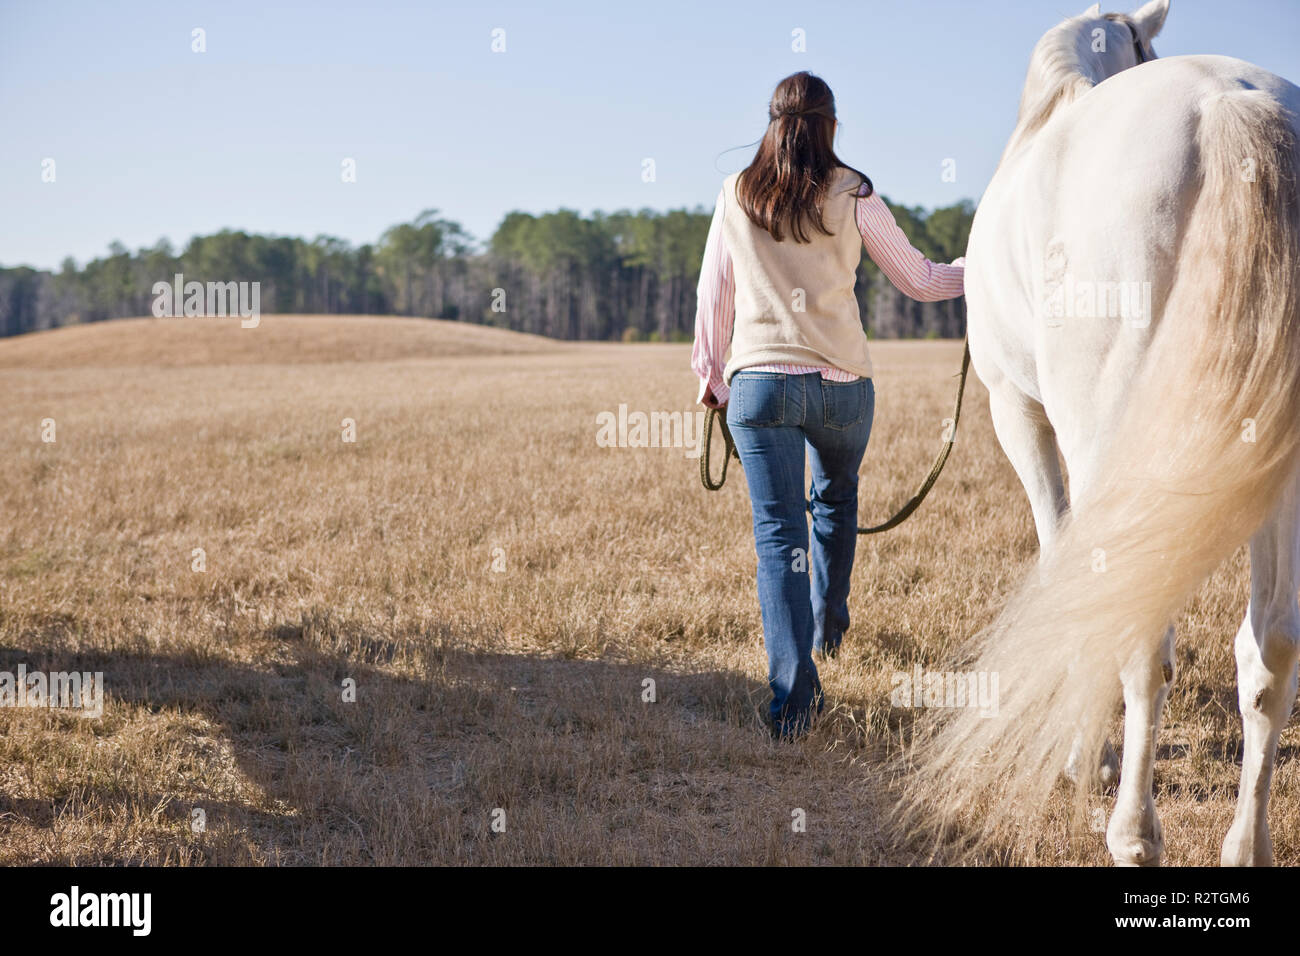 Young woman leading her horse through a field Stock Photo